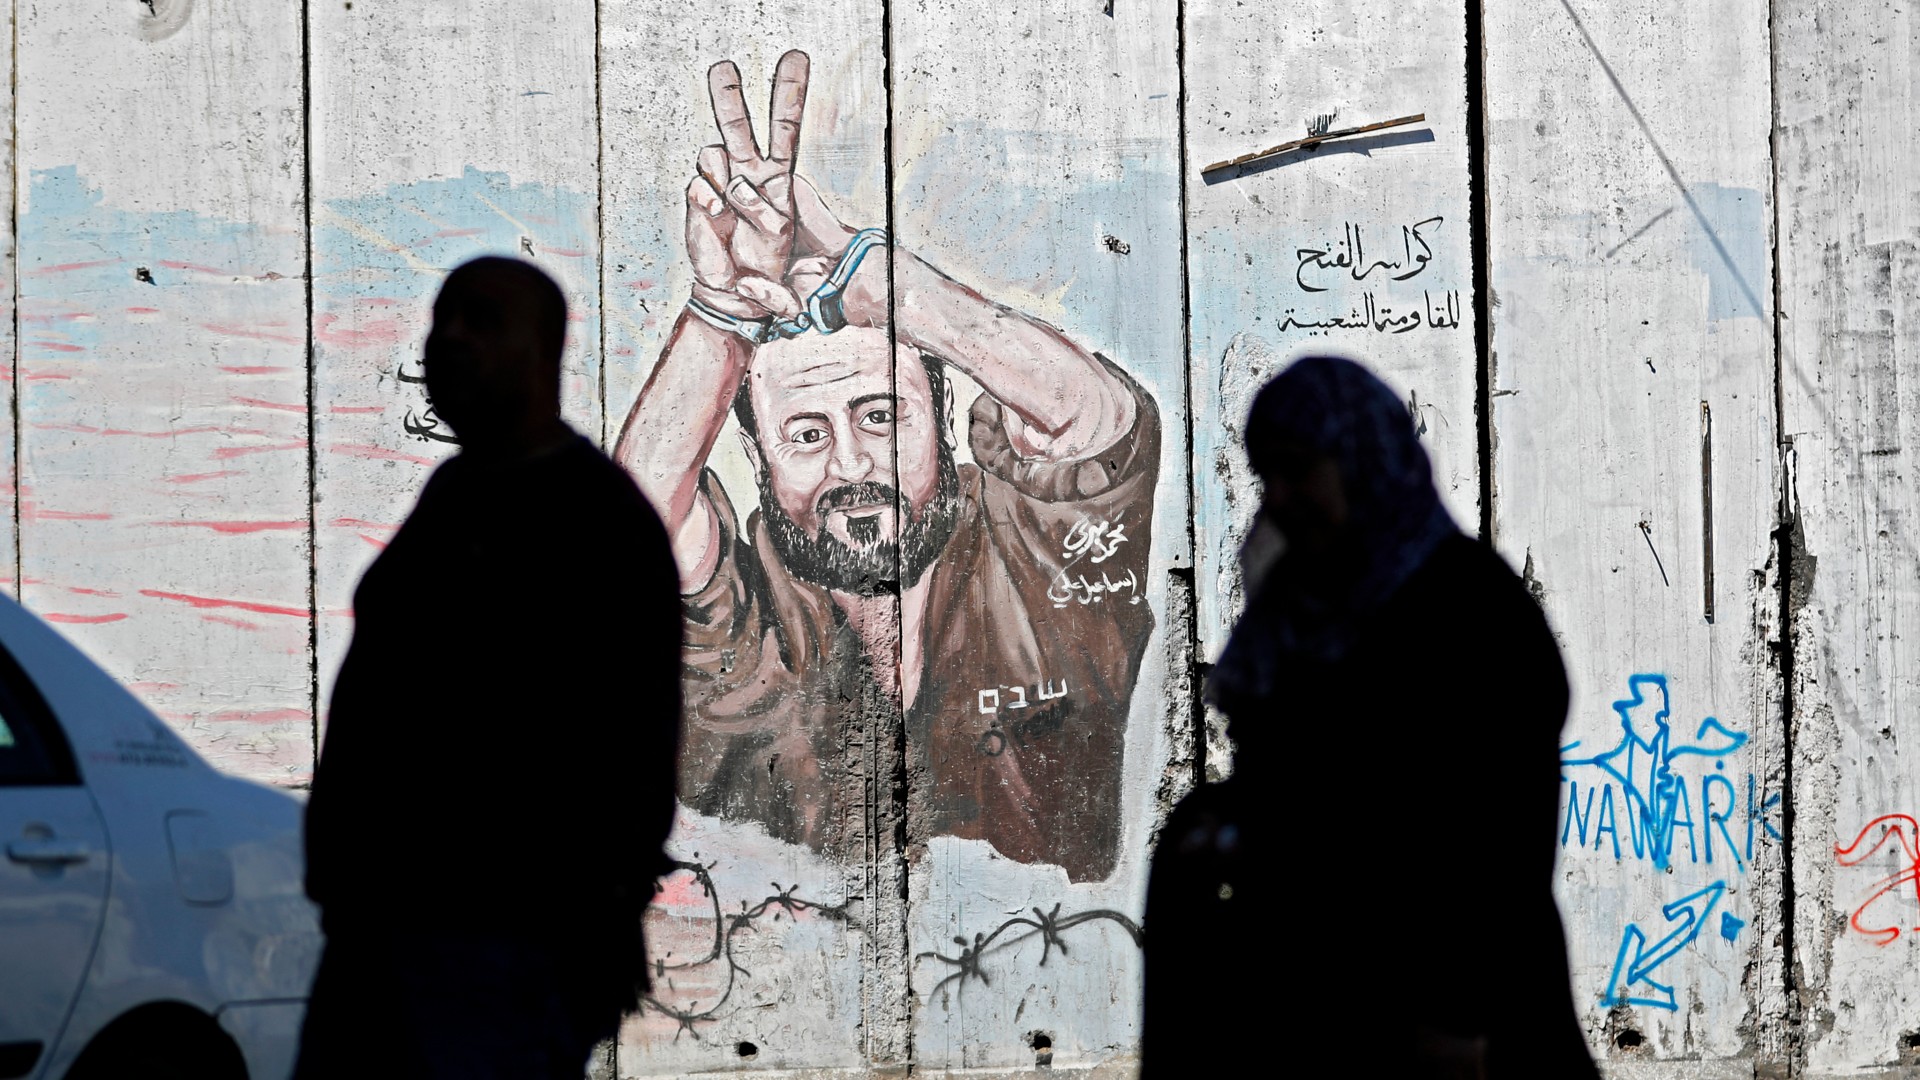 Palestinians walk past graffiti depicting Palestinian prisoner Marwan Barghouti in the occupied West Bank city of Abu Dis on 13 March 2018 (Thomas Coex/AFP)